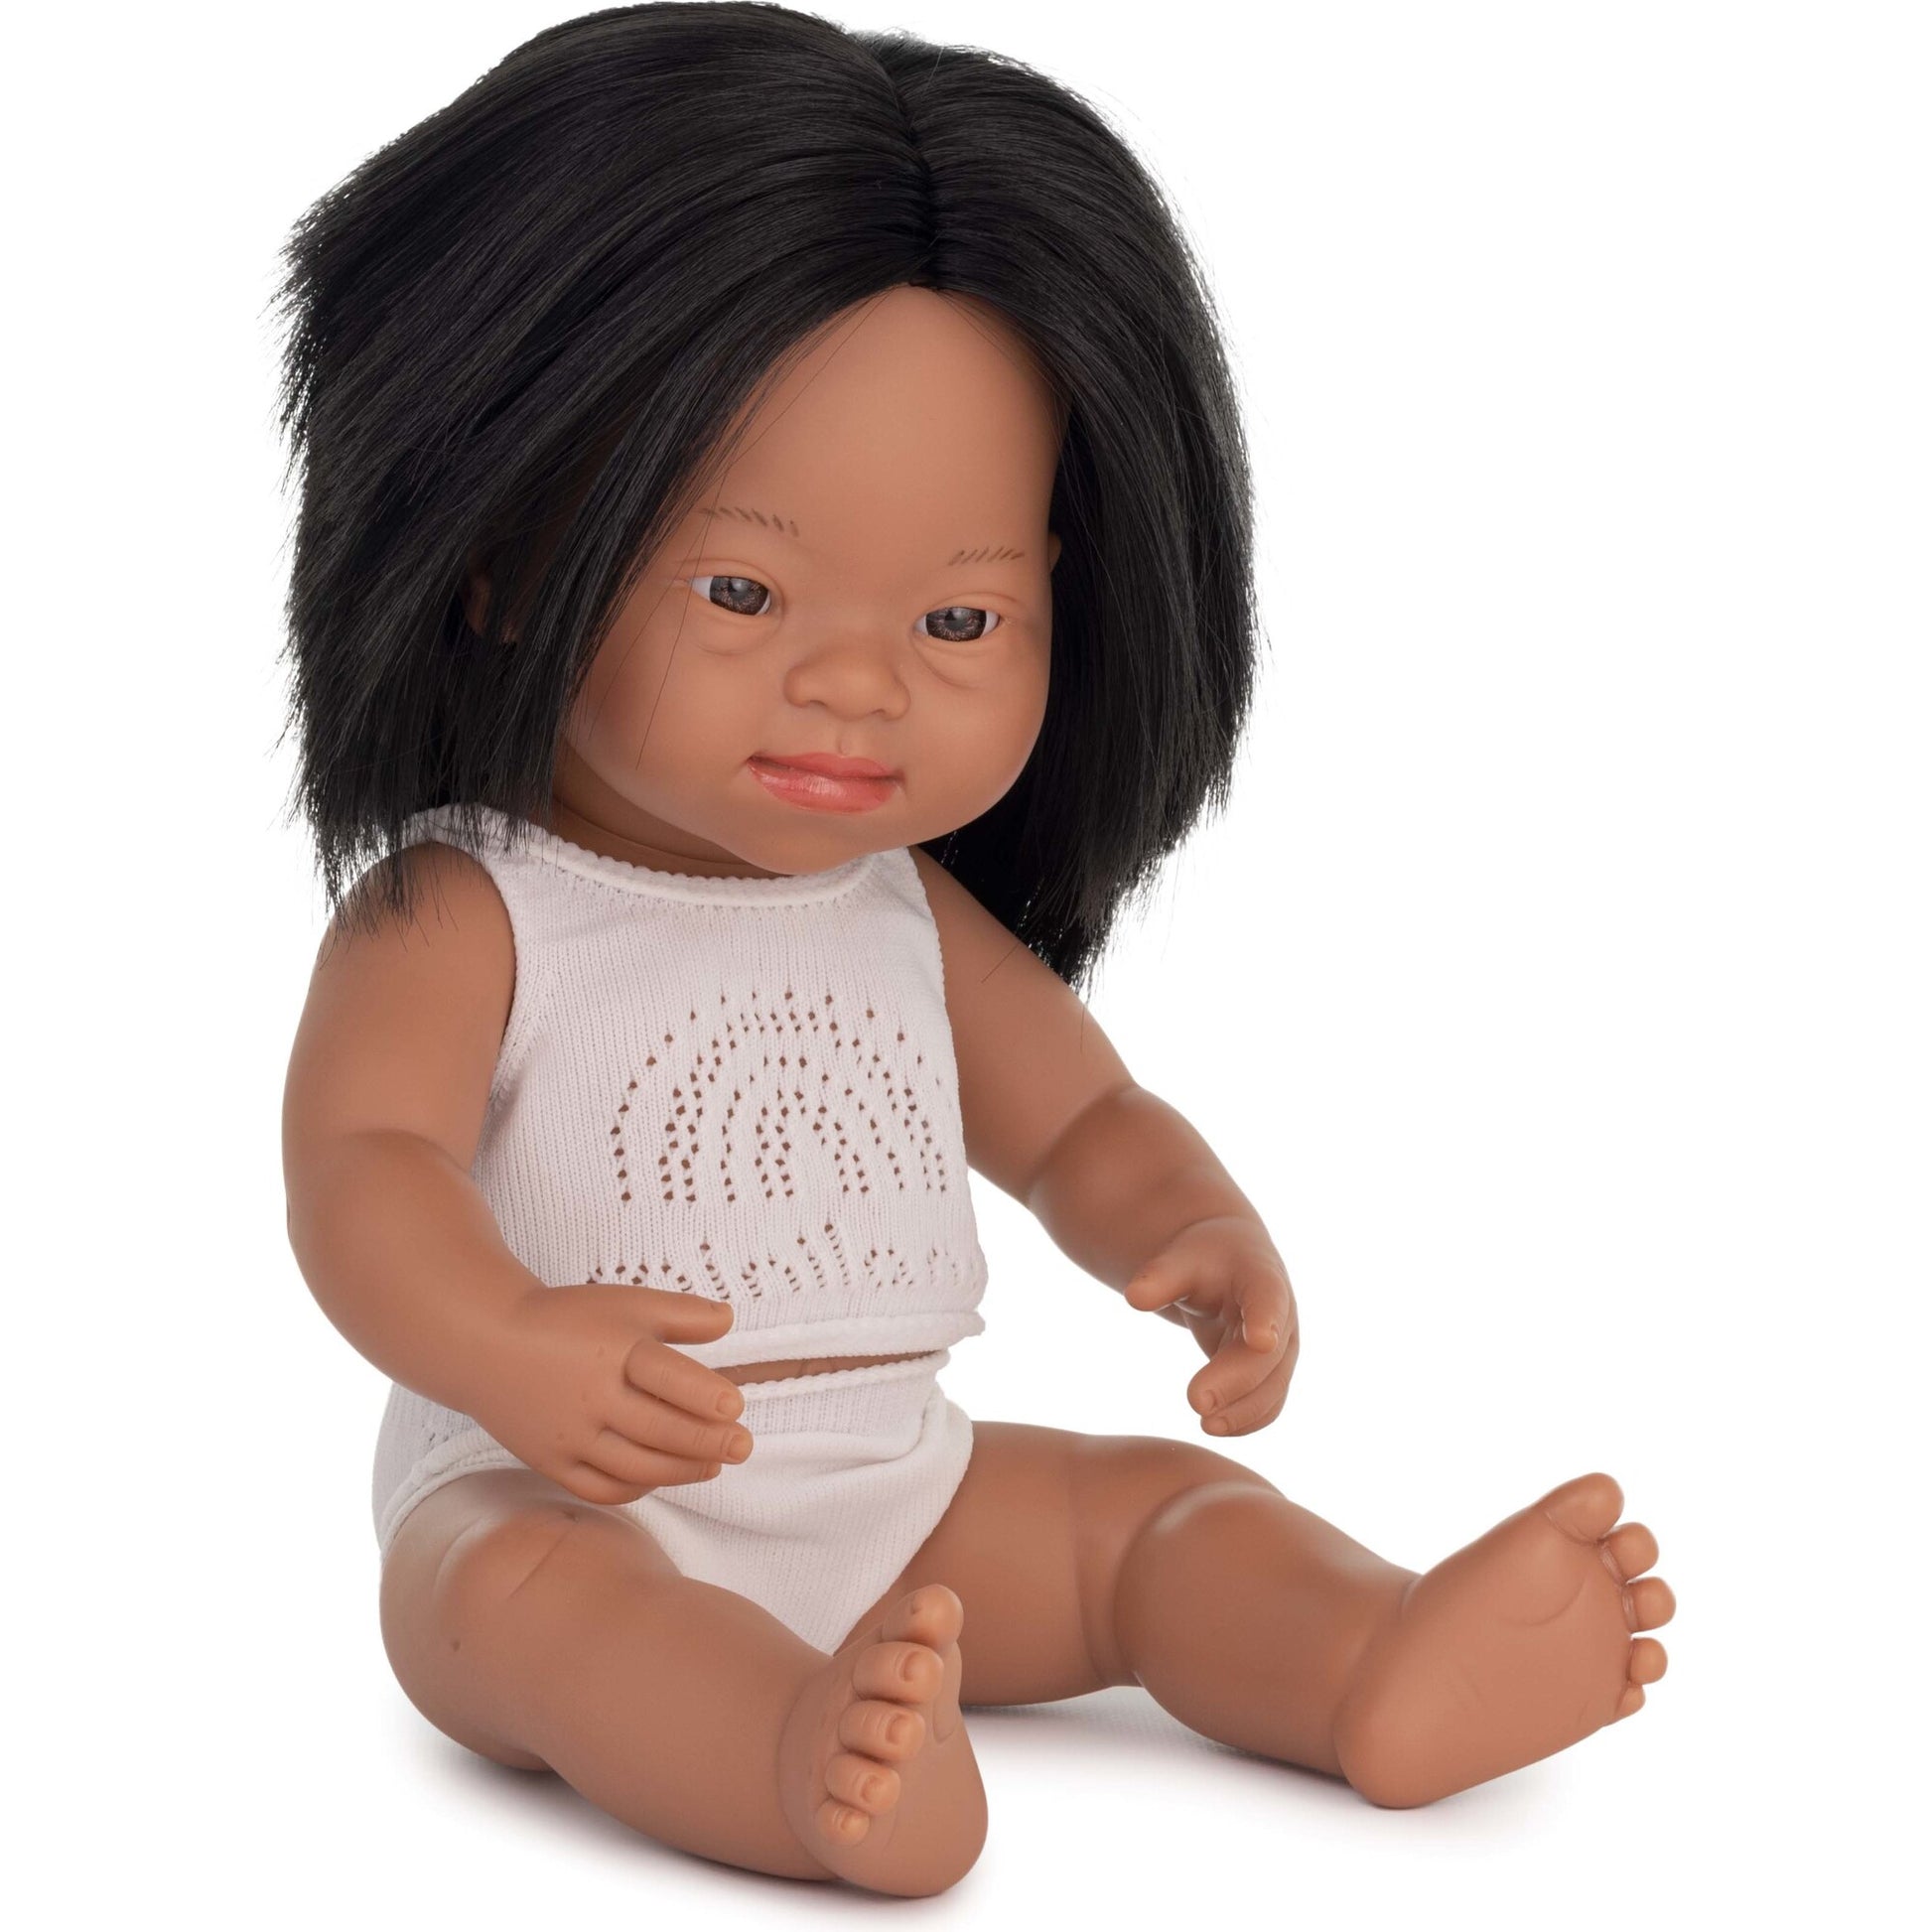 Miniland Baby Doll Hispanic Girl with Down Syndrome 15" Dolls